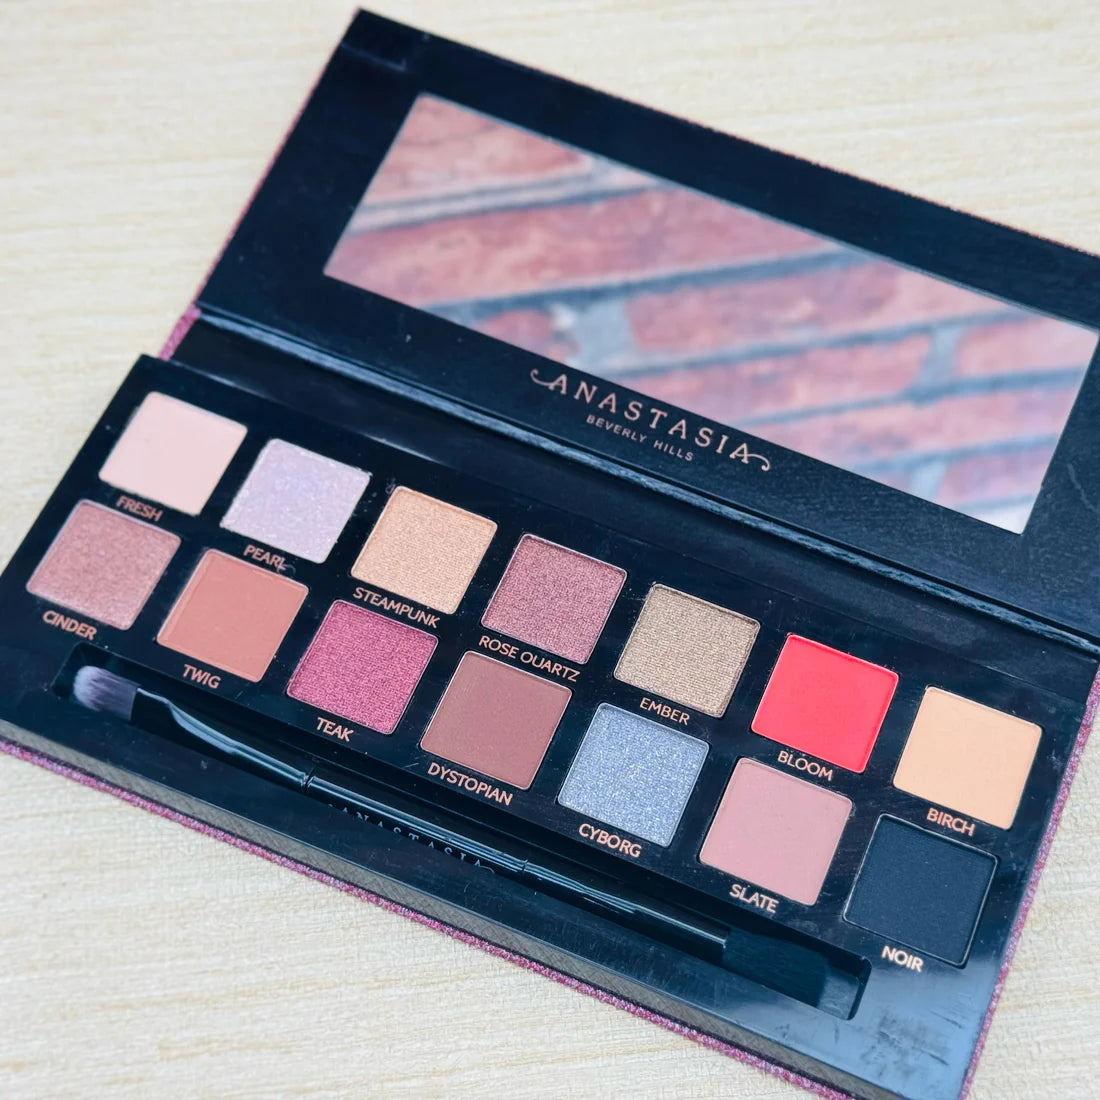 Anastasia Beverly Hills Sultry Palette | Makeup Kit